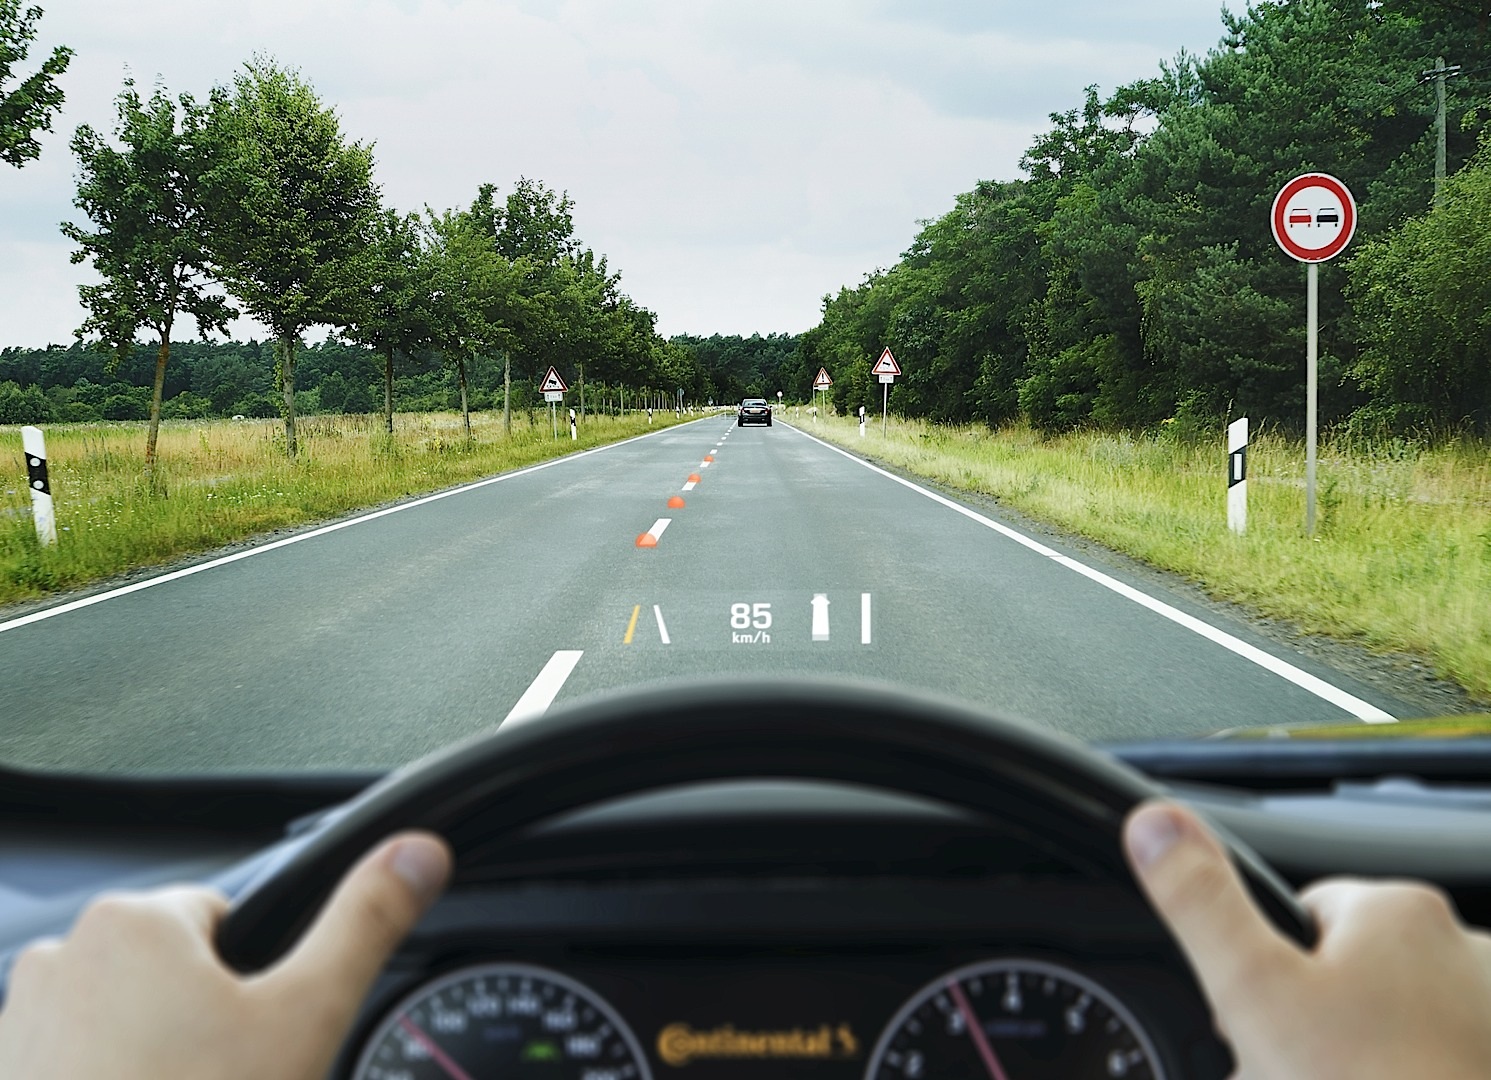 Continental Shows Its Augmented Reality Head-up Display for 2017 - autoevolution1491 x 1080